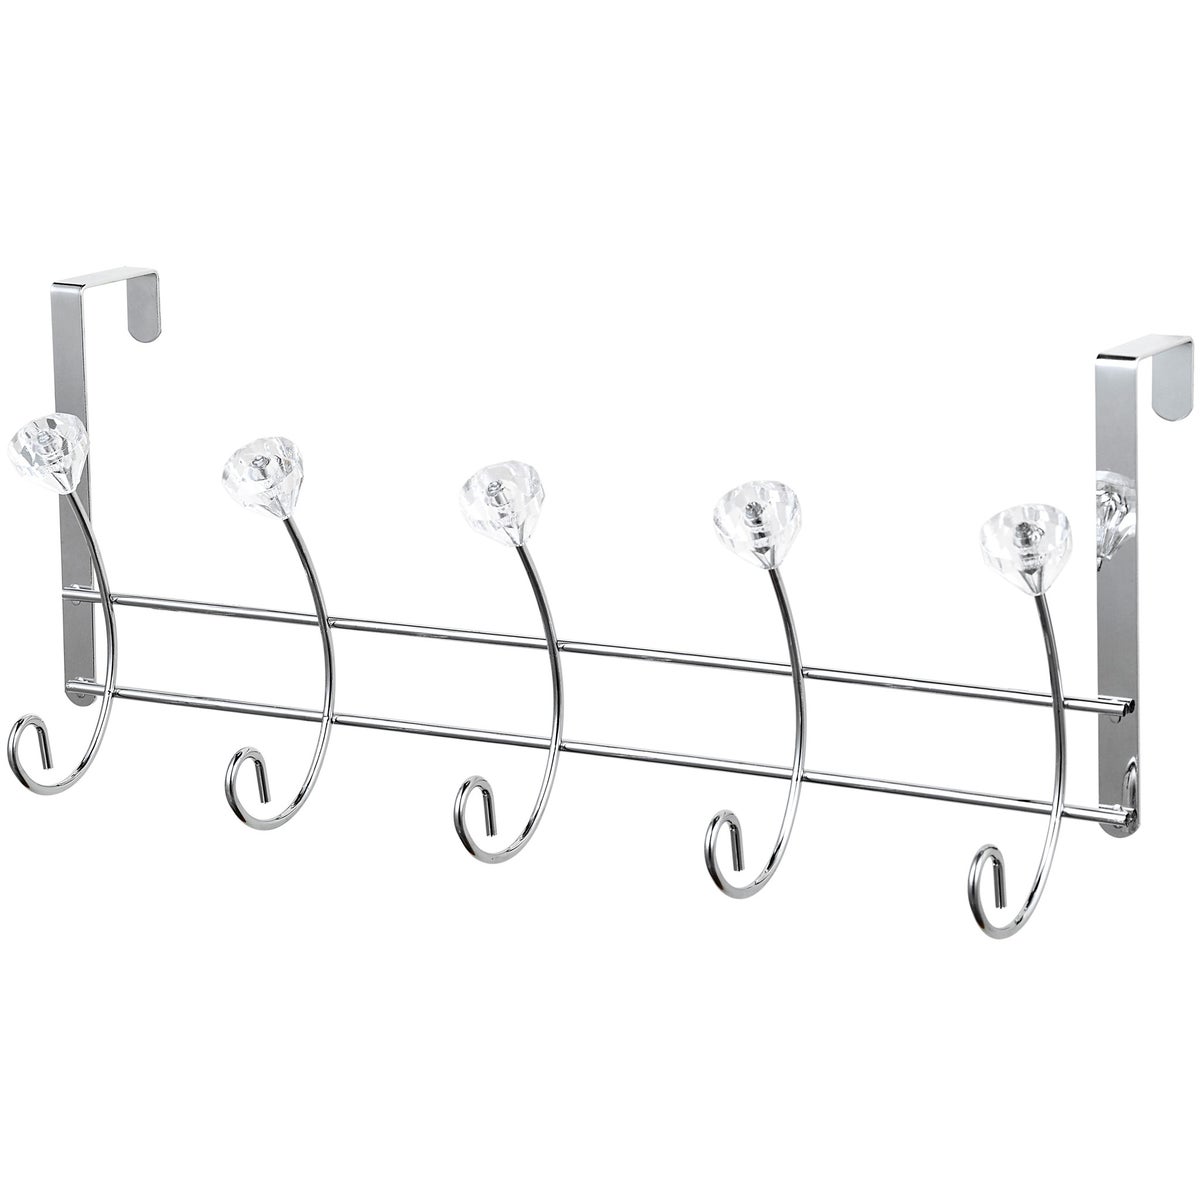 Chrome - Over-the-Door 10 Hook Rack with 5 Crystal Knobs (12)